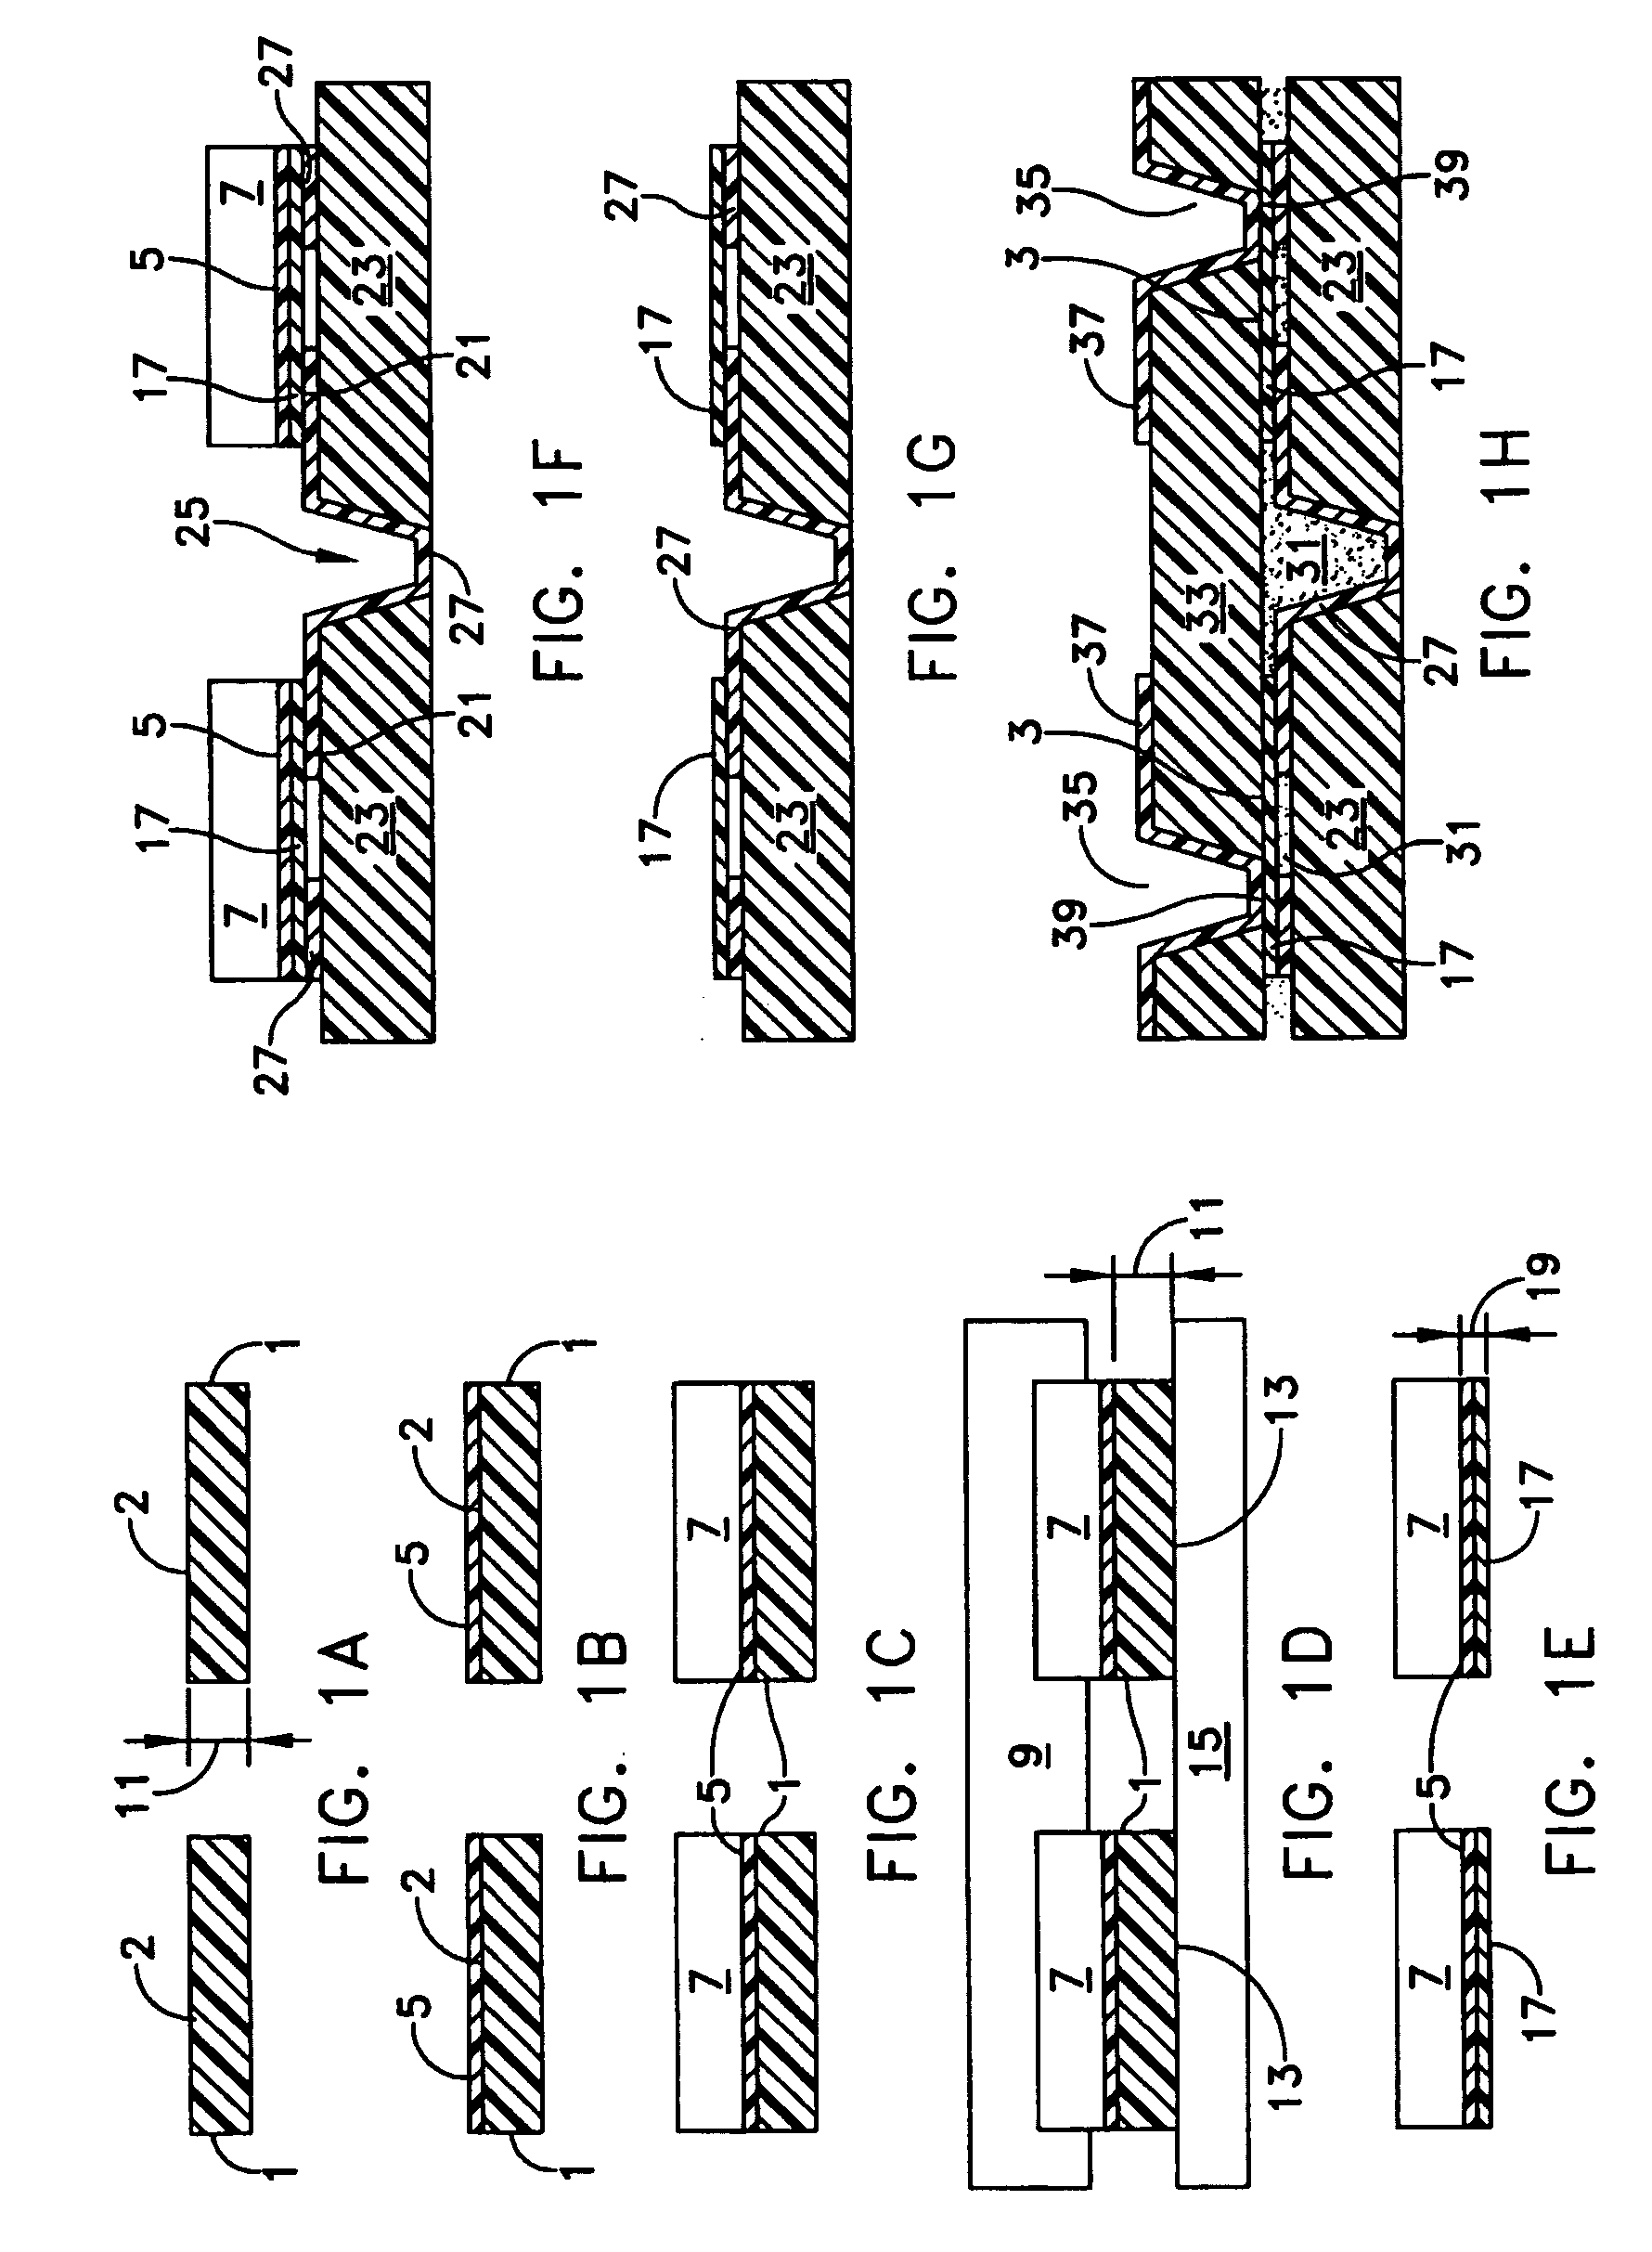 Thin embedded active IC circuit integration techniques for flexible and rigid circuits